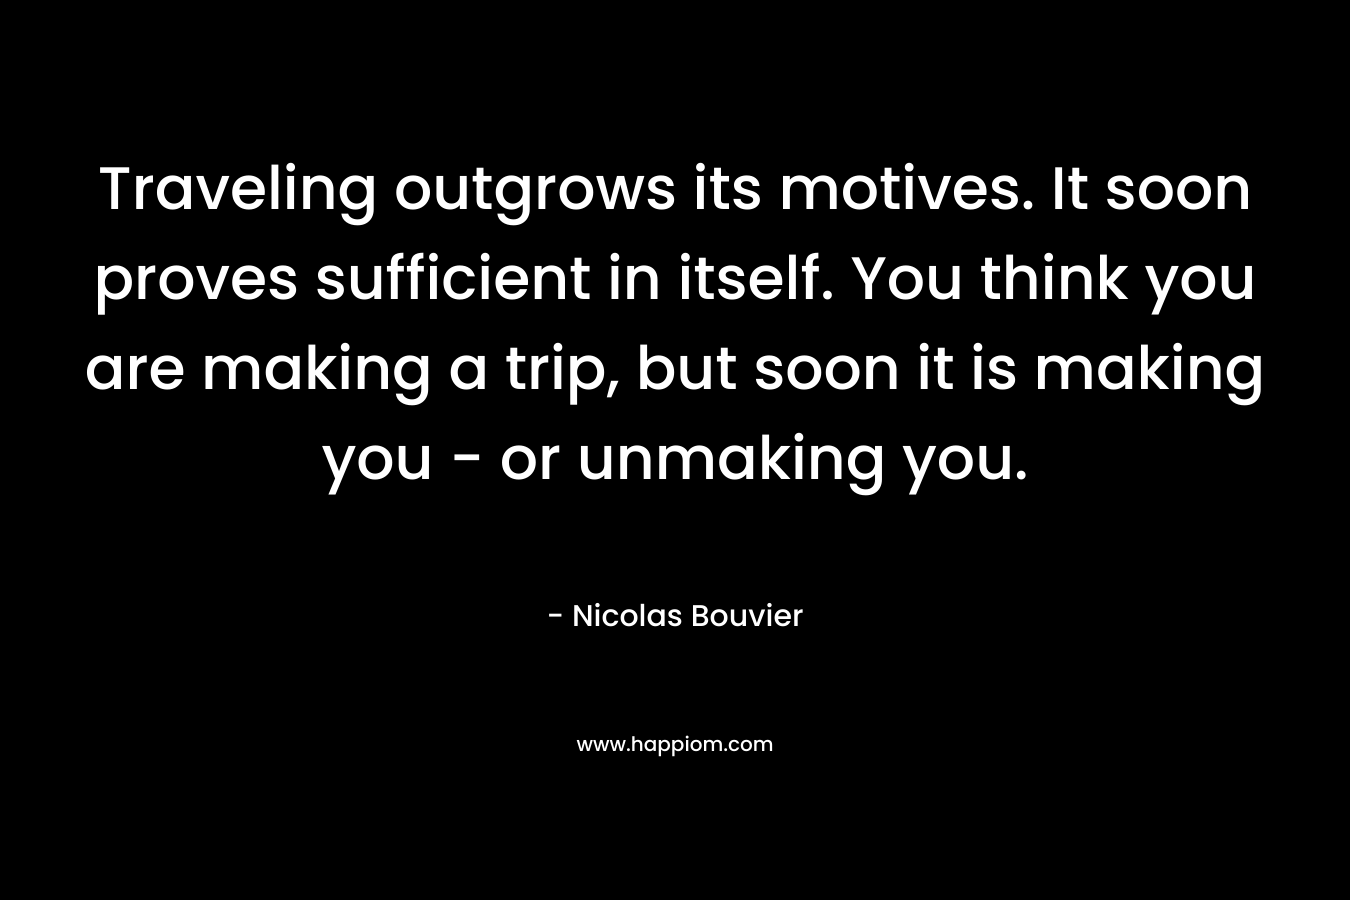 Traveling outgrows its motives. It soon proves sufficient in itself. You think you are making a trip, but soon it is making you - or unmaking you.